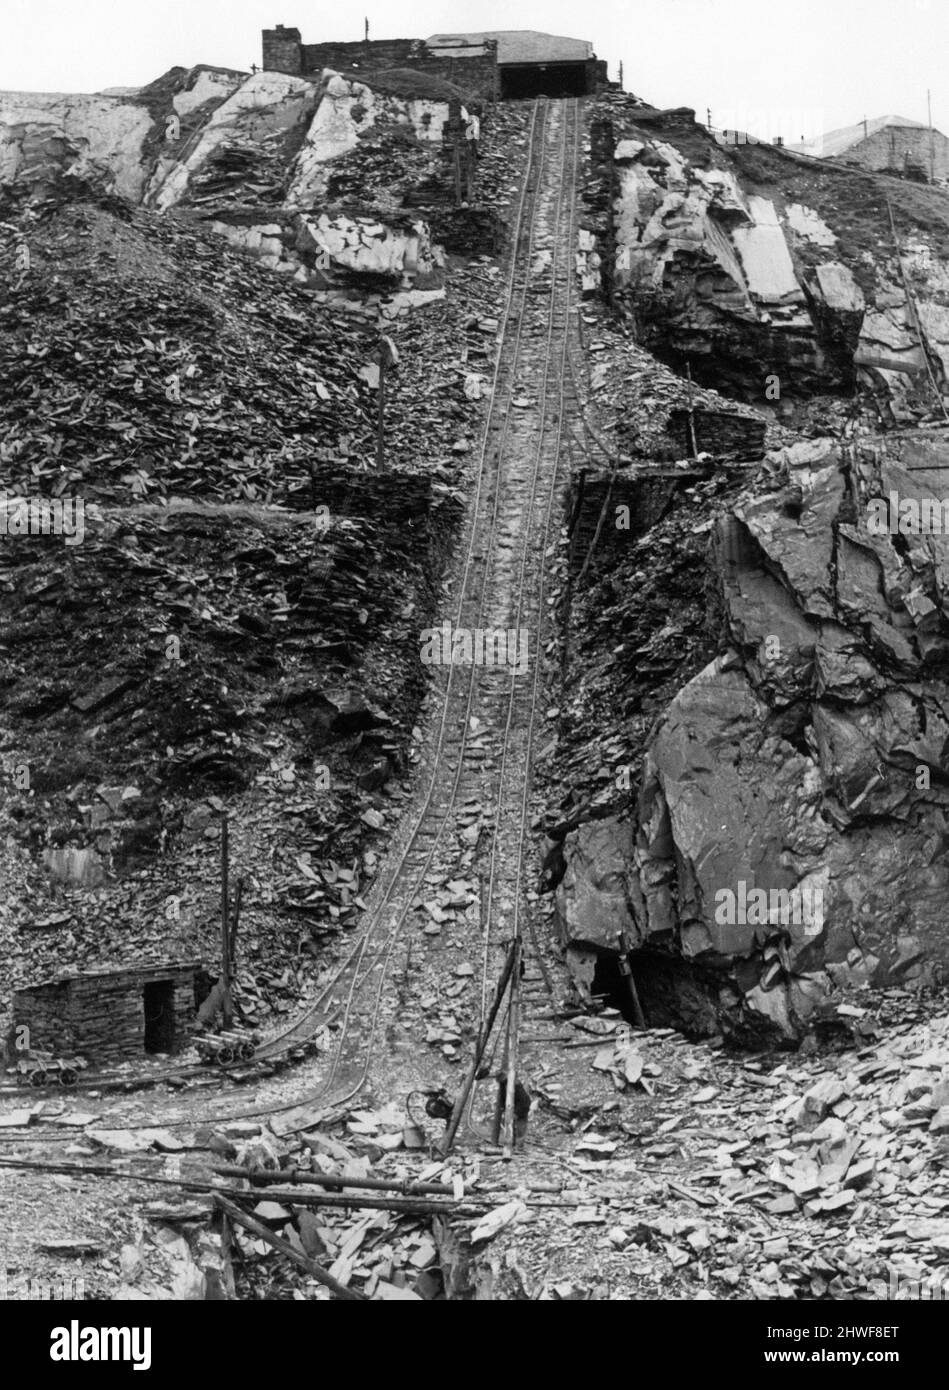 Blaenau Ffestiniog is a historic mining town in the historic county of Merionethshire, Wales, 2nd October 1970. Our Picture Shows ... known as the Incline, the long haul slate blocks take to reach the slate mill on the top of the hill. Stock Photo